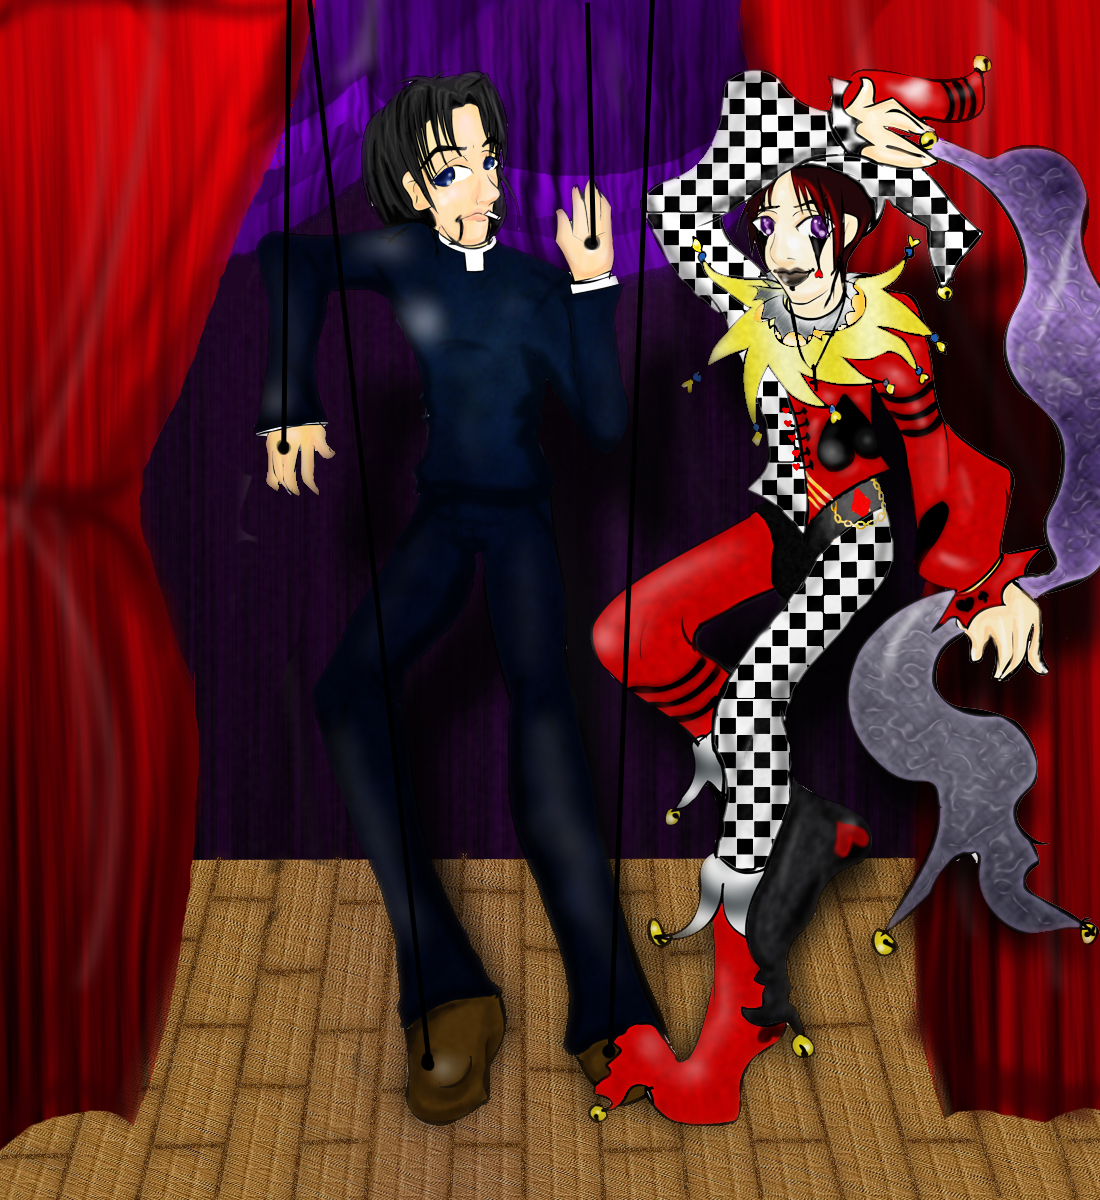 The Jester and the Marionette by Aiwen_Chan